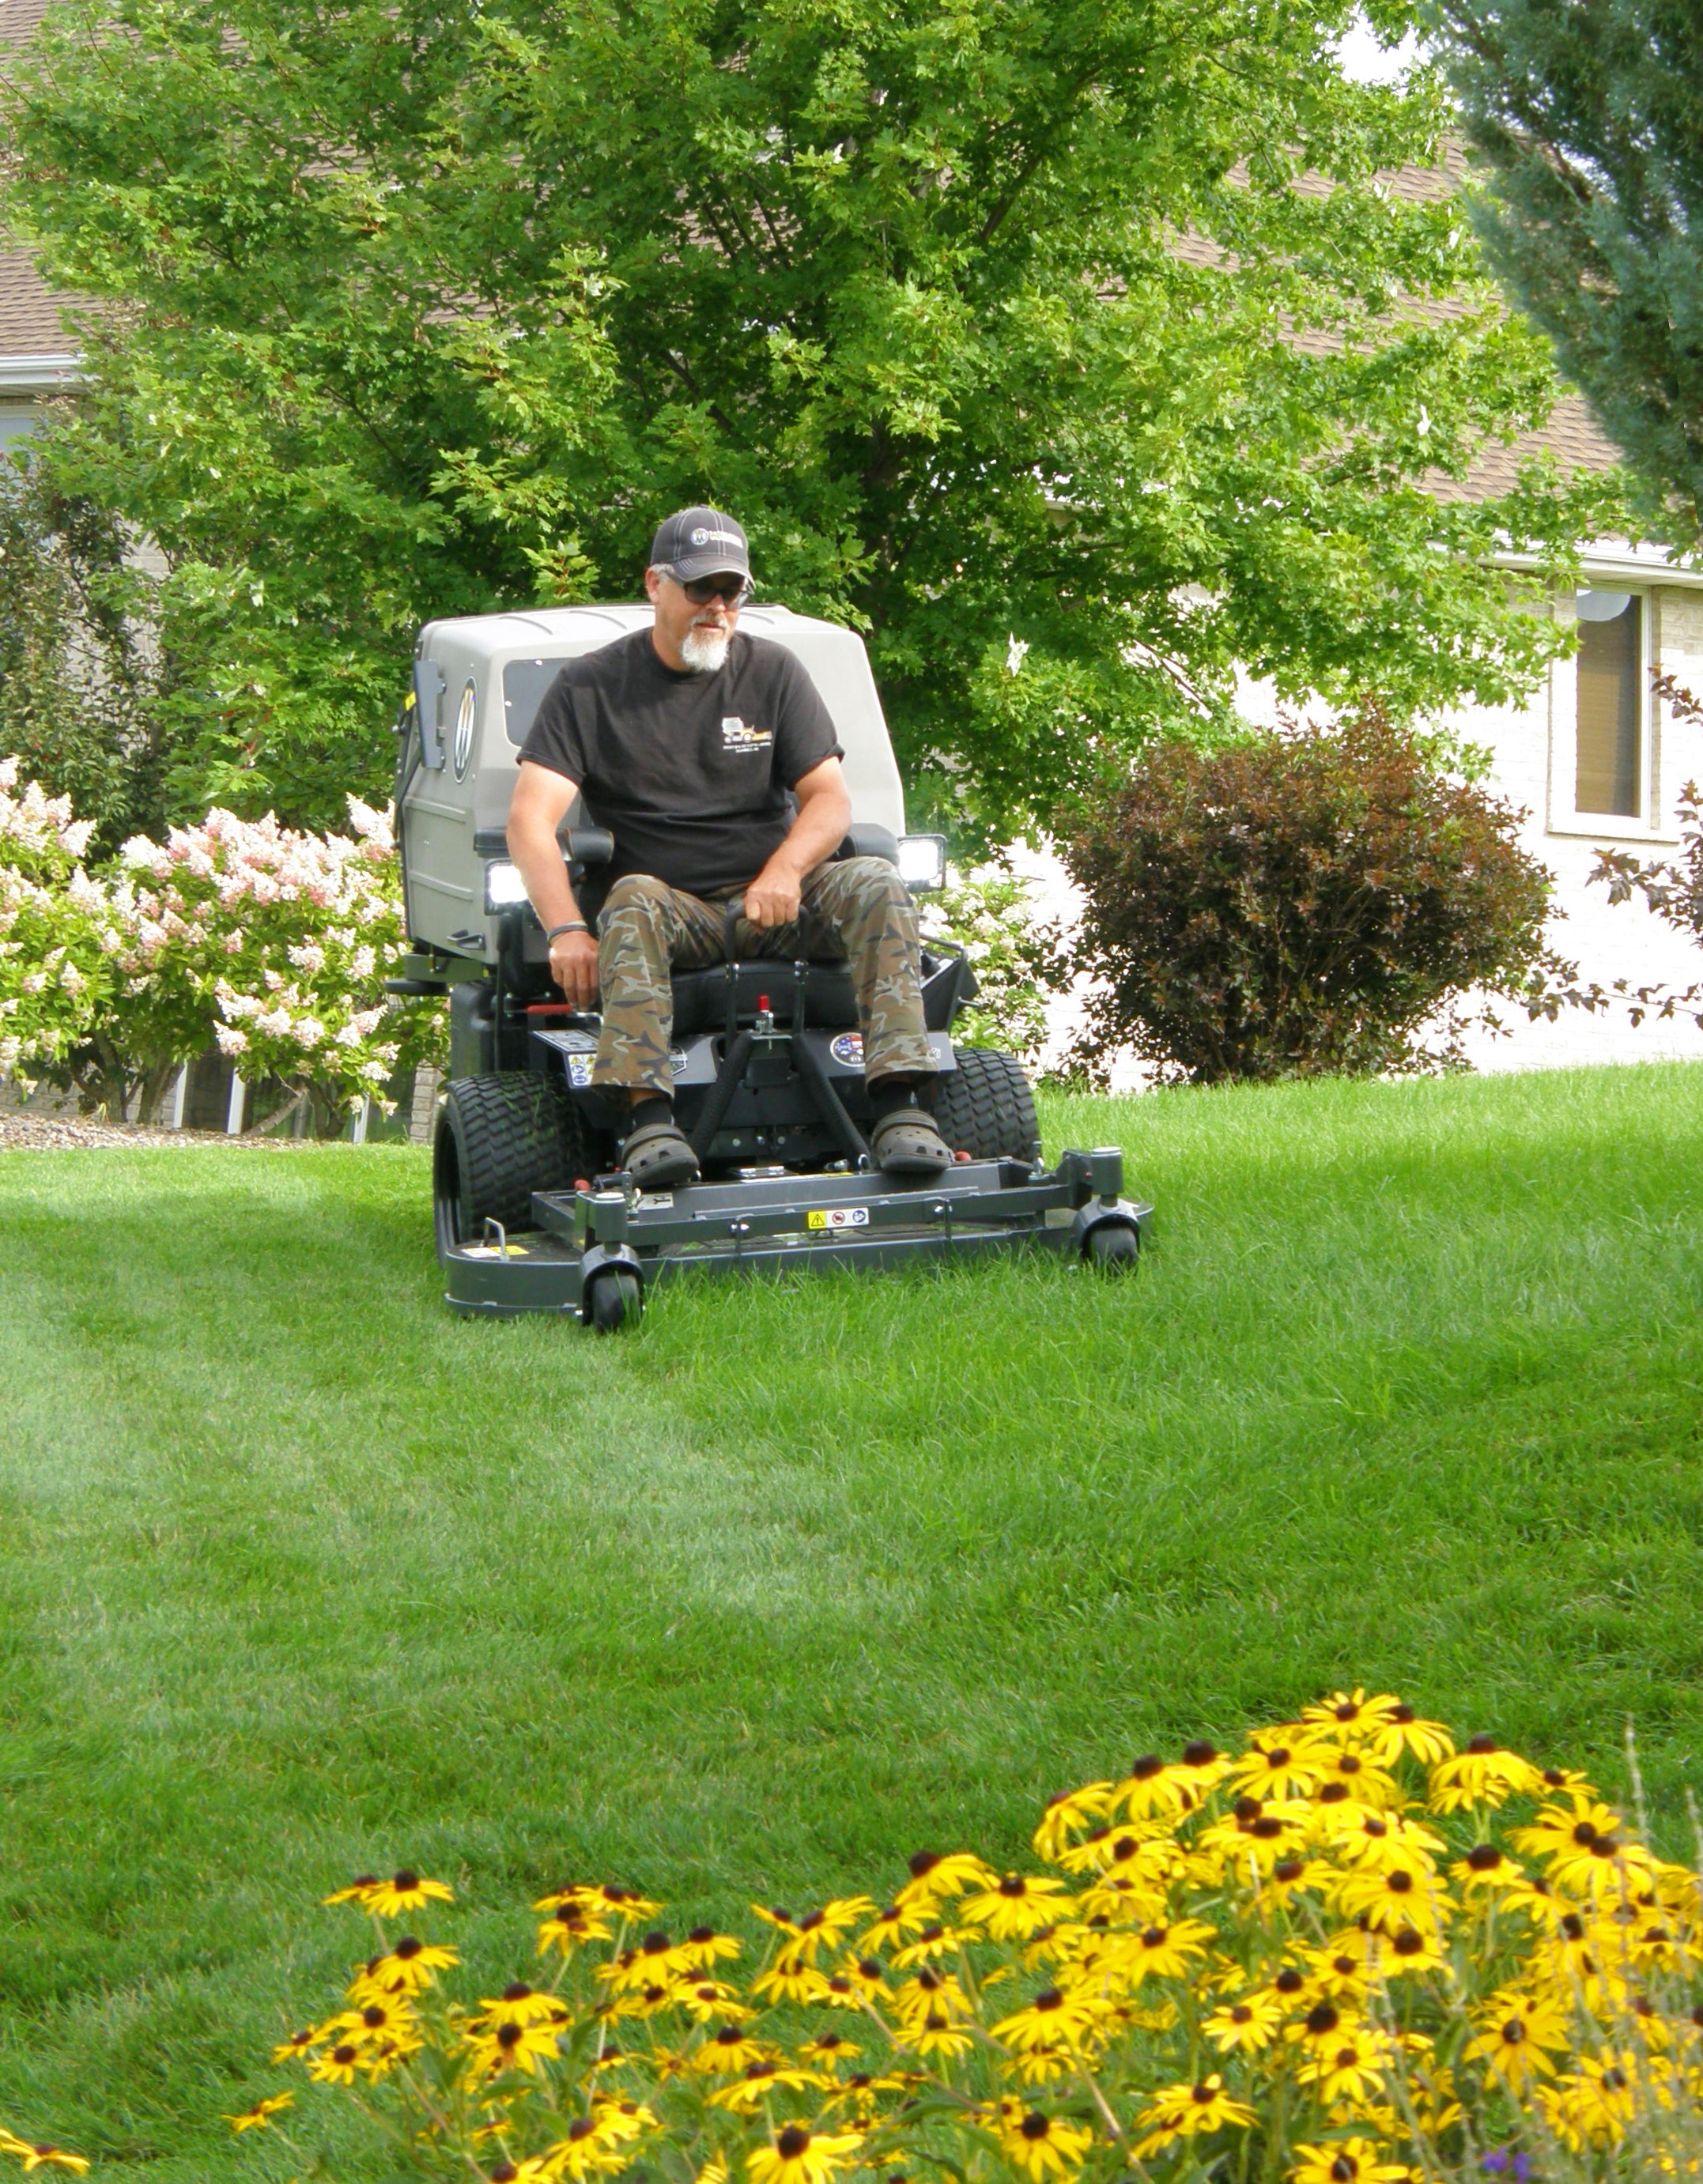 Rick Blosser mowing his lawn